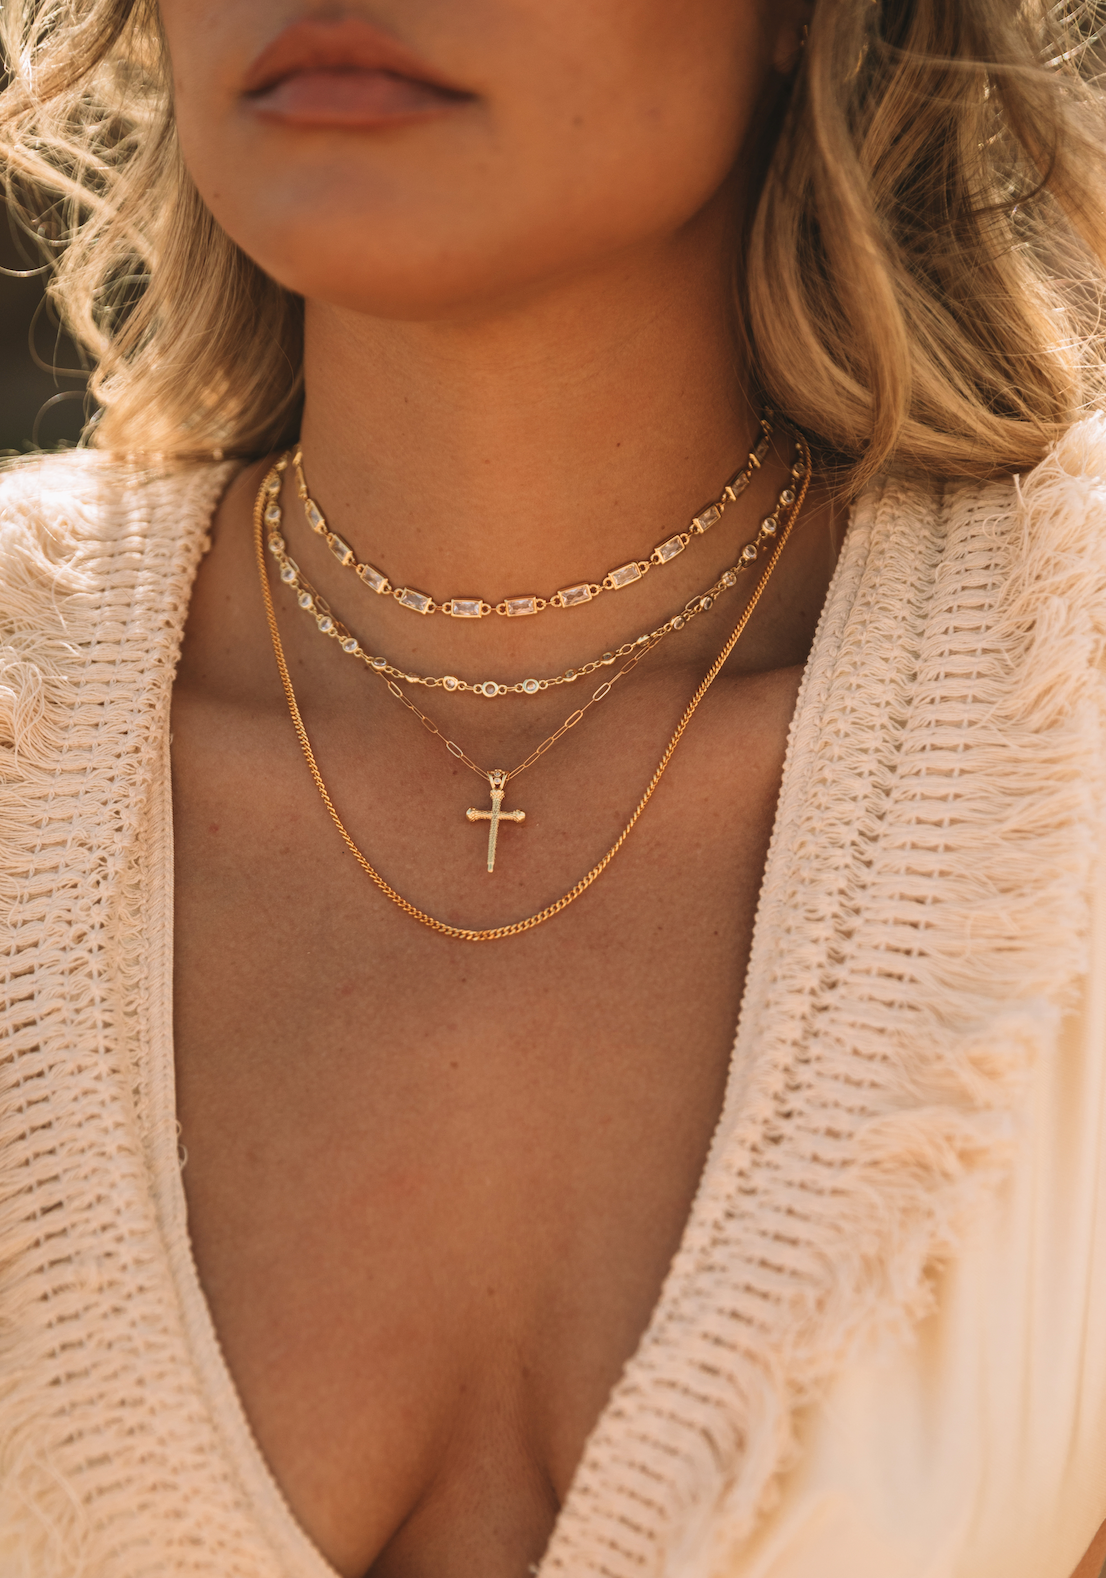 14K YELLOW GOLD DOUBLE SIDED PAVE SIDEWAYS CROSS NECKLACE | Patty Q's  Jewelry Inc